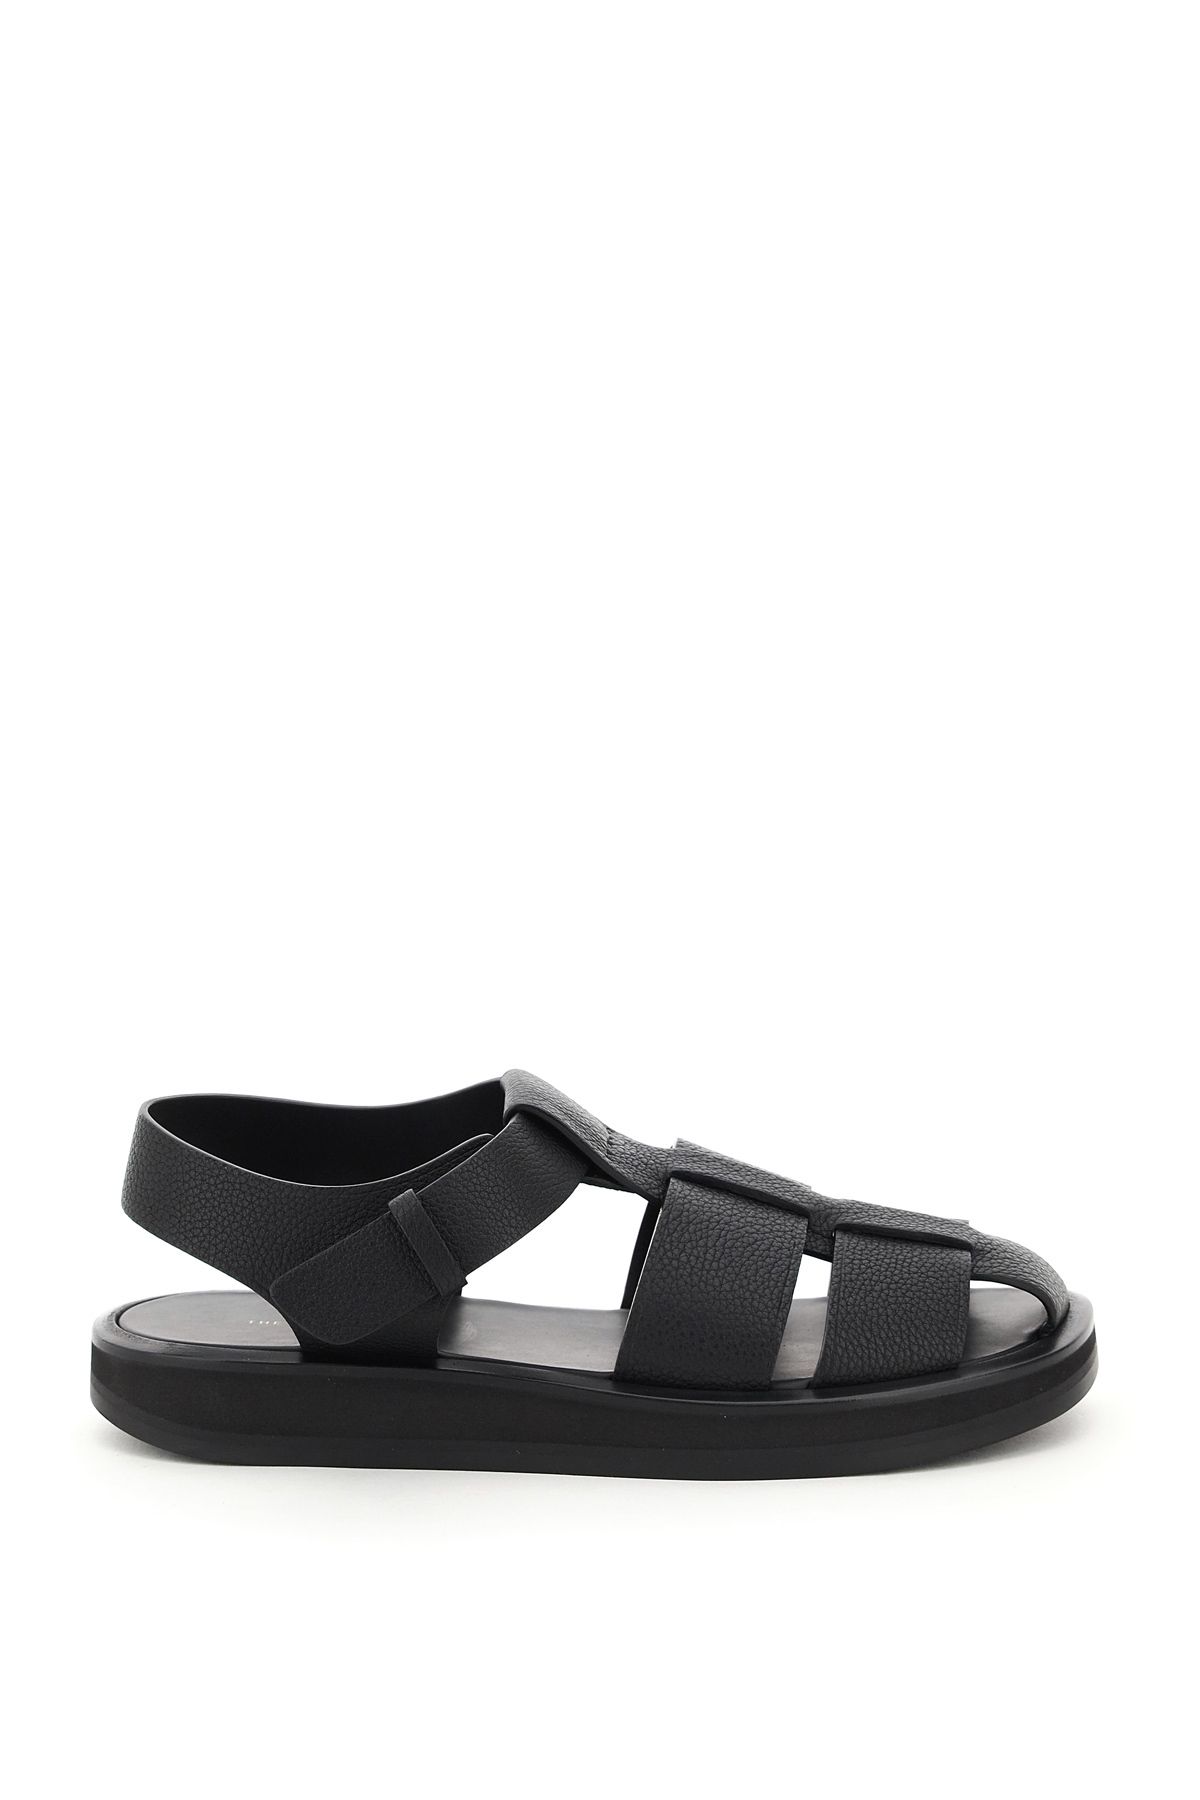 The Row Hammered Leather Fisherman Sandals In Black